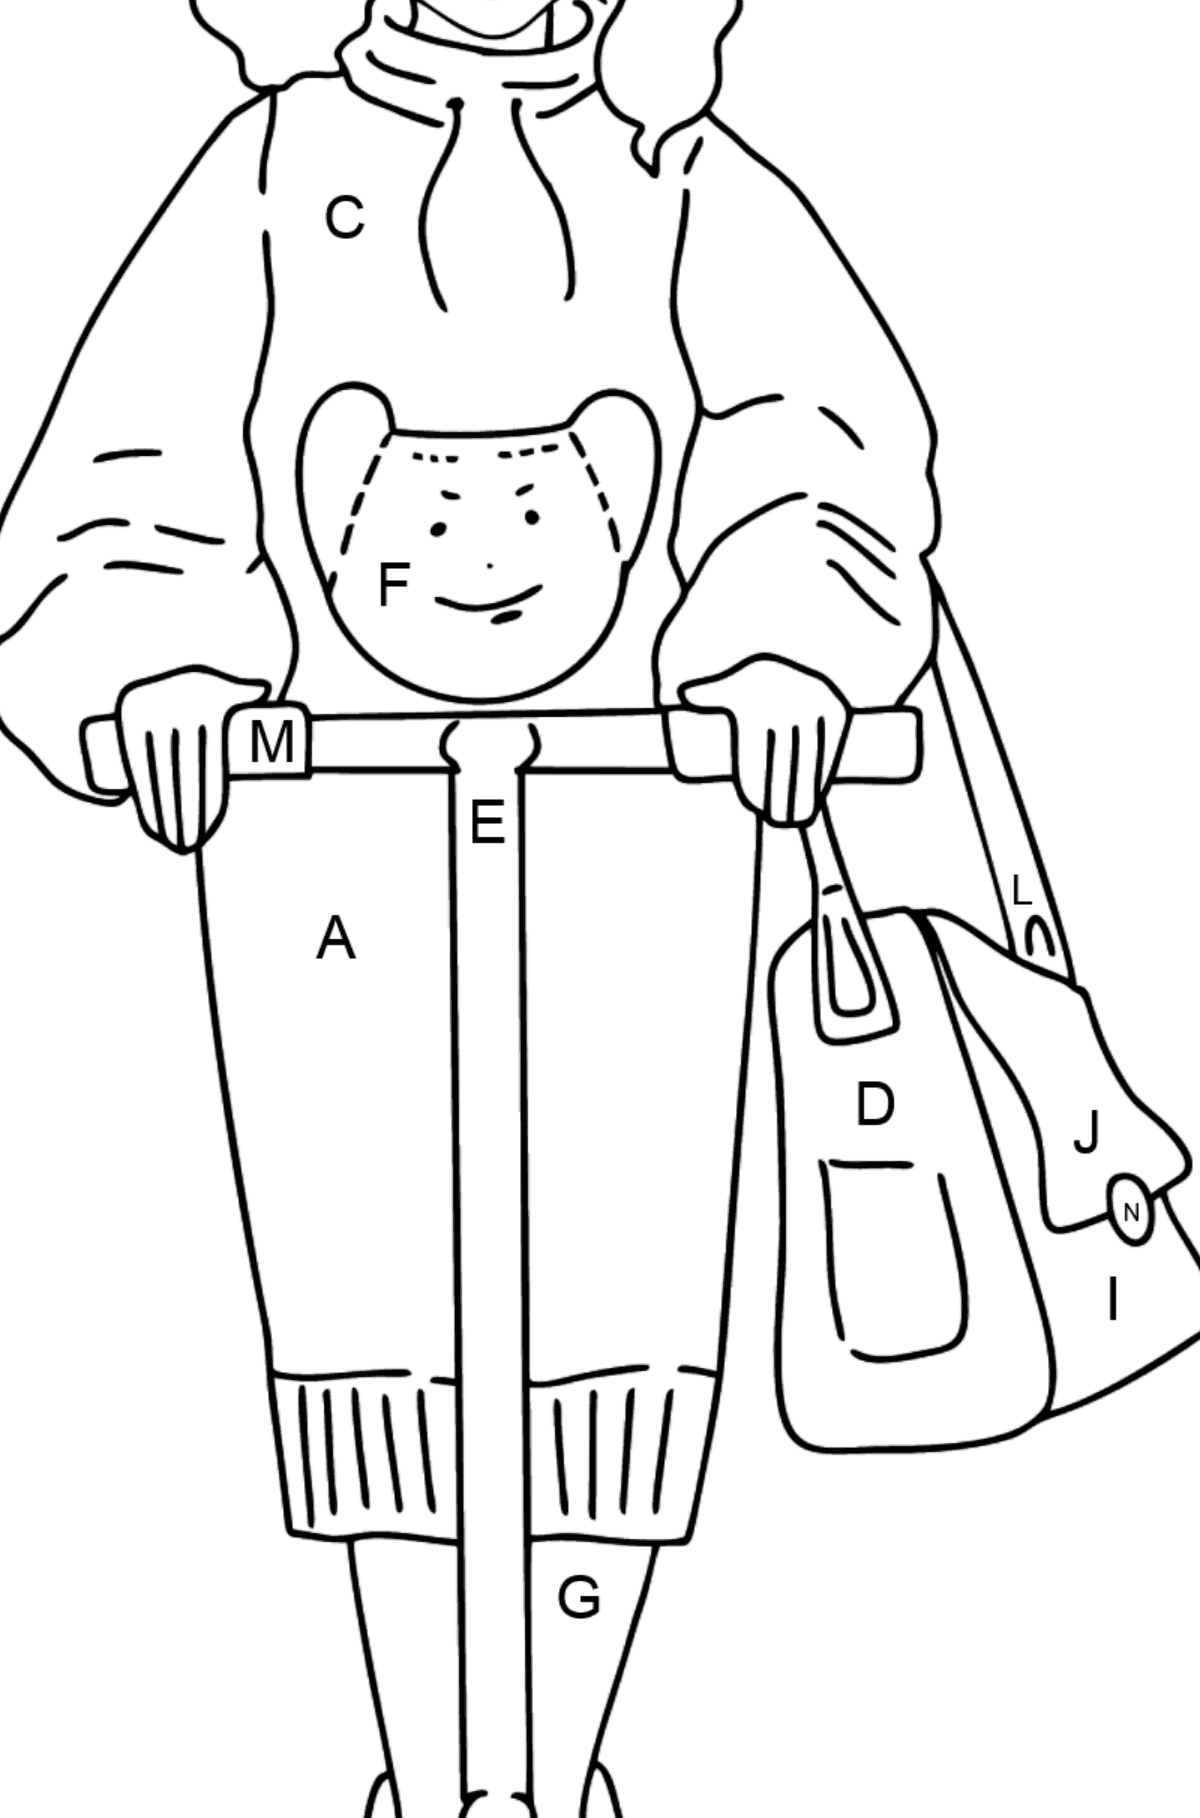 Barbie Doll Riding a Scooter coloring page - Coloring by Letters for Kids